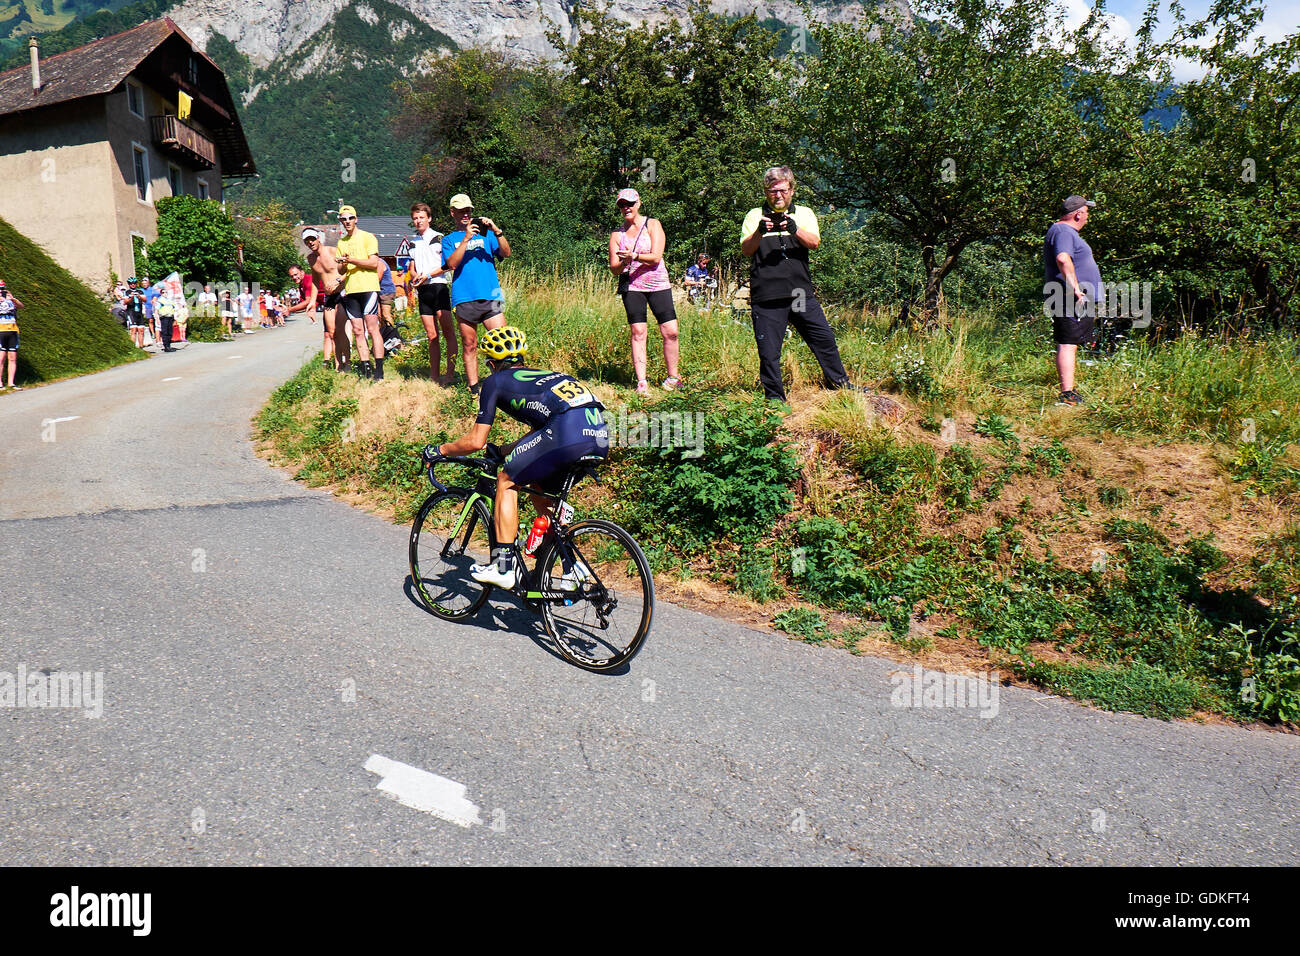 Jonathan Castroviejo Nicolas from team Moviestar riding alone to the top on the mountain stage at Montvernier in Tour de France Stock Photo